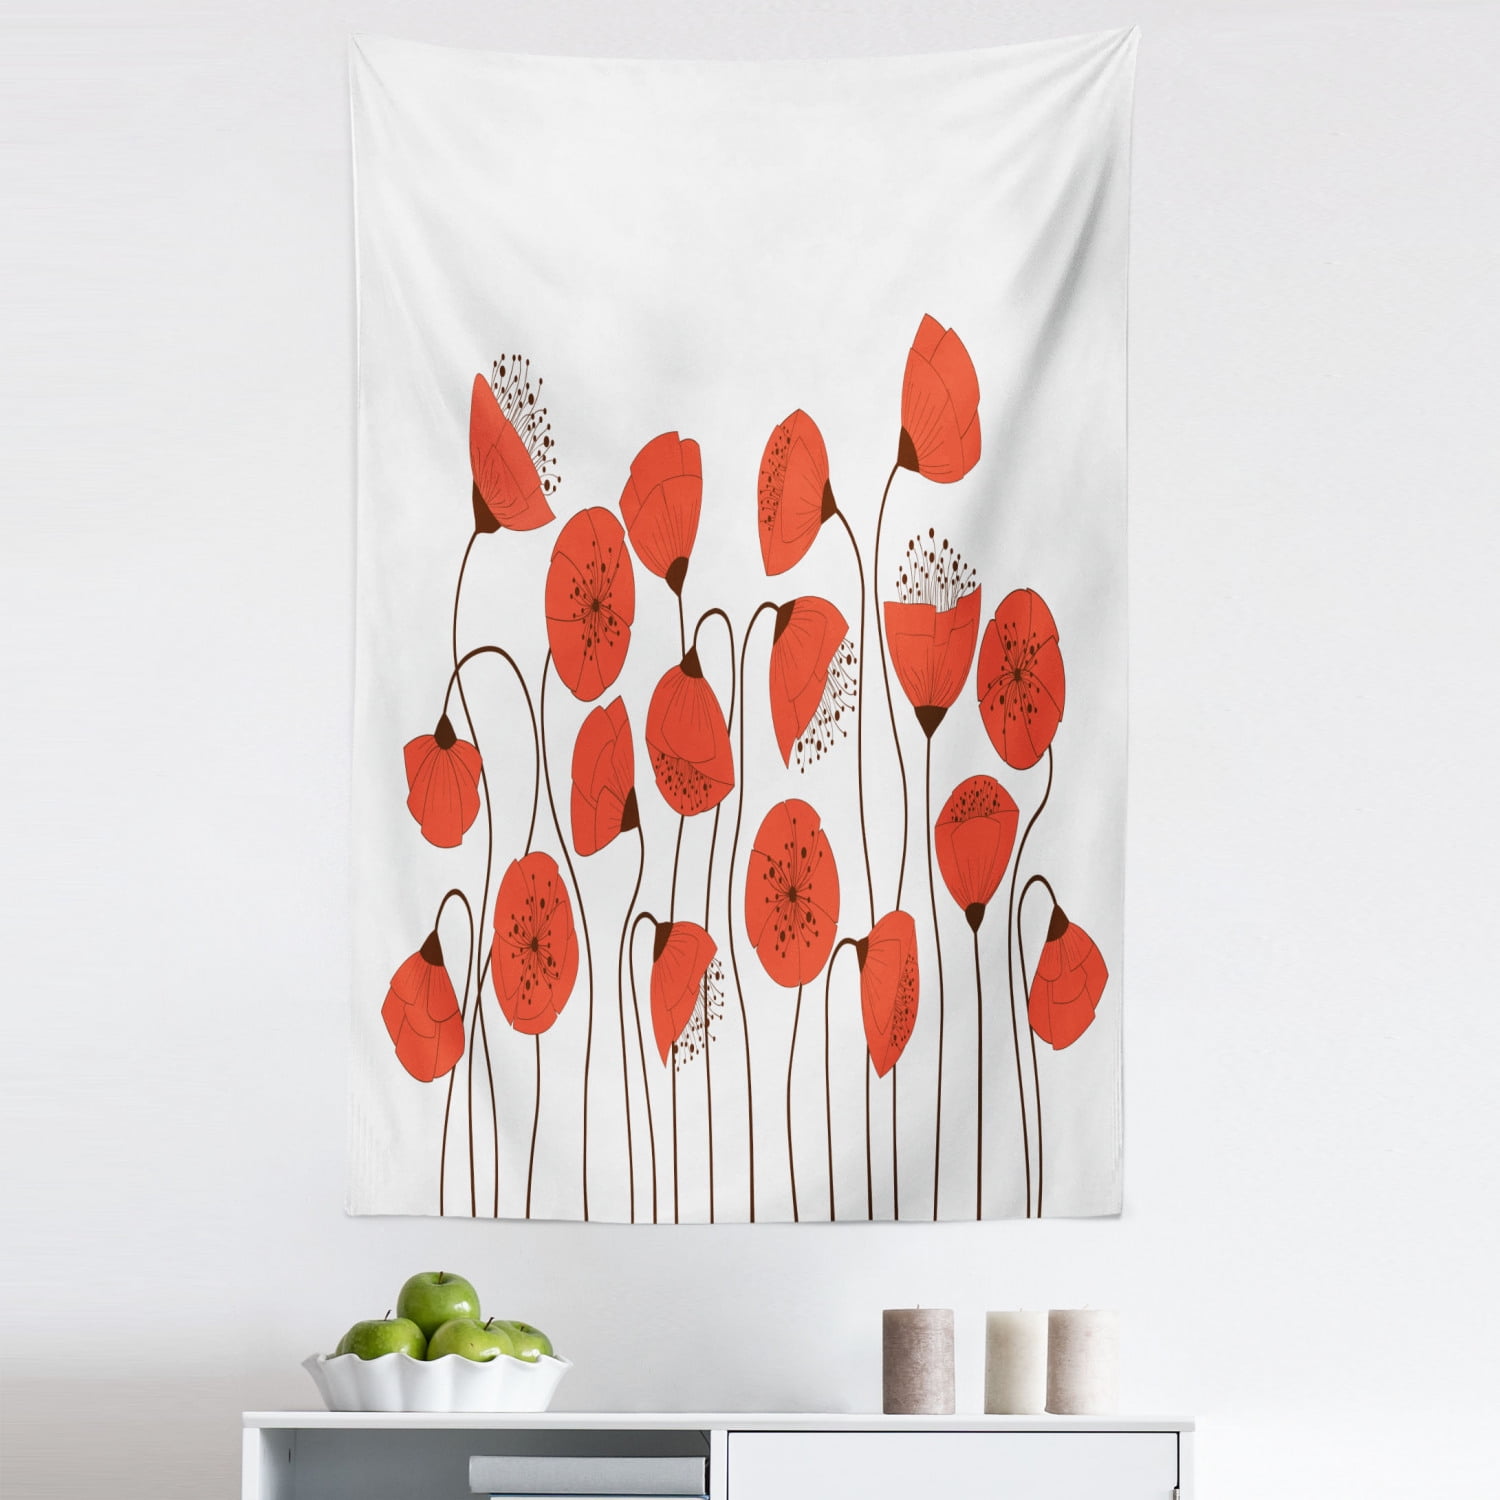 Vermilion and Pearl Fabric Wall Hanging Decor for Bedroom Living Room Dorm Ambesonne Flower Tapestry Poppy Flowers Blossom Art Deco Style Summertime Garden Modern Repetition 45 X 30 